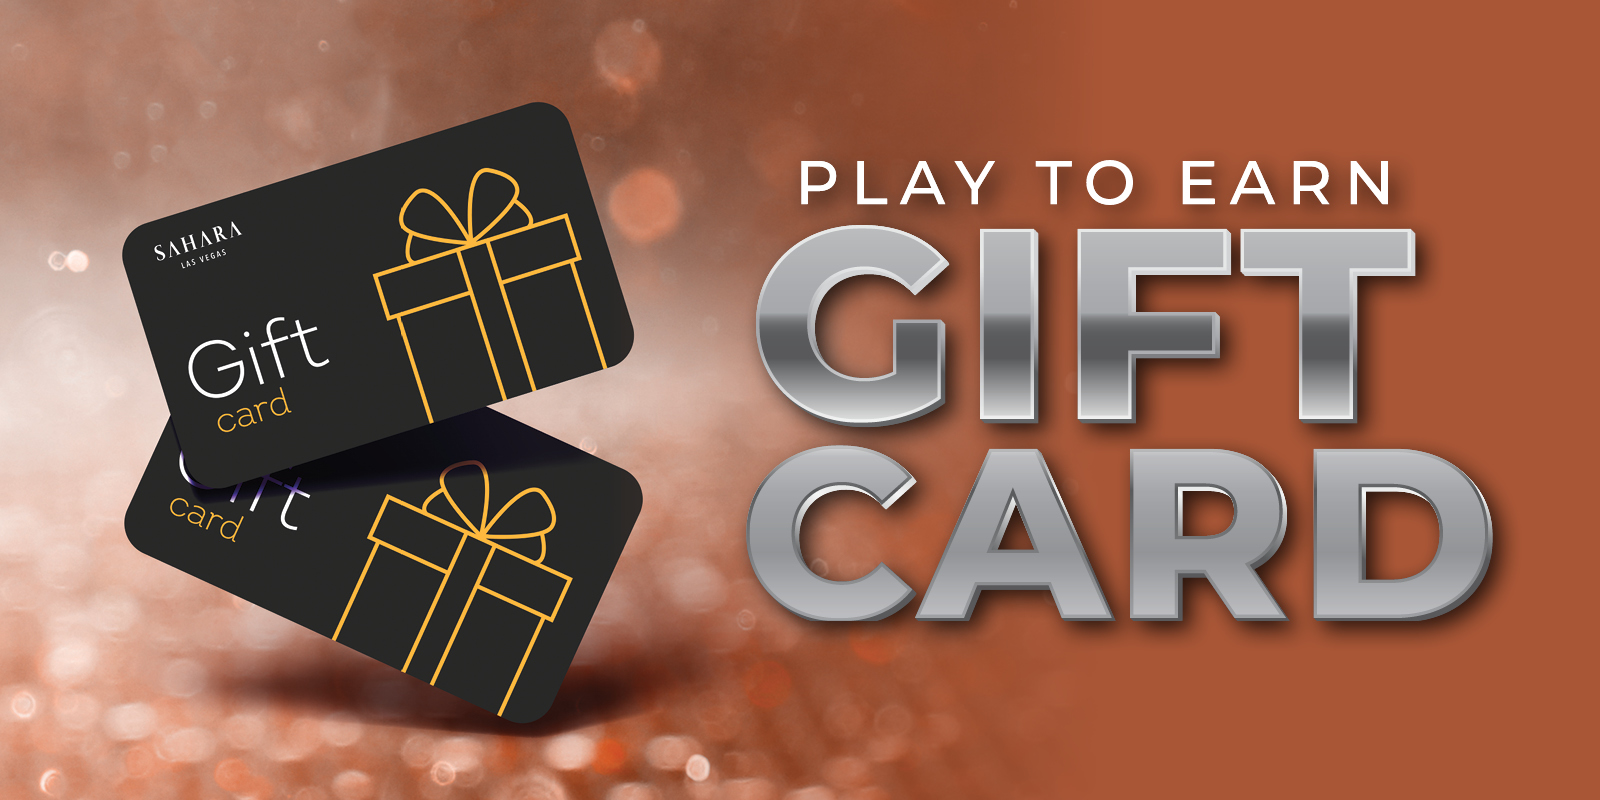 Play to Earn Amazon Gift Cards showing two gift cards and a brown autumn color theme